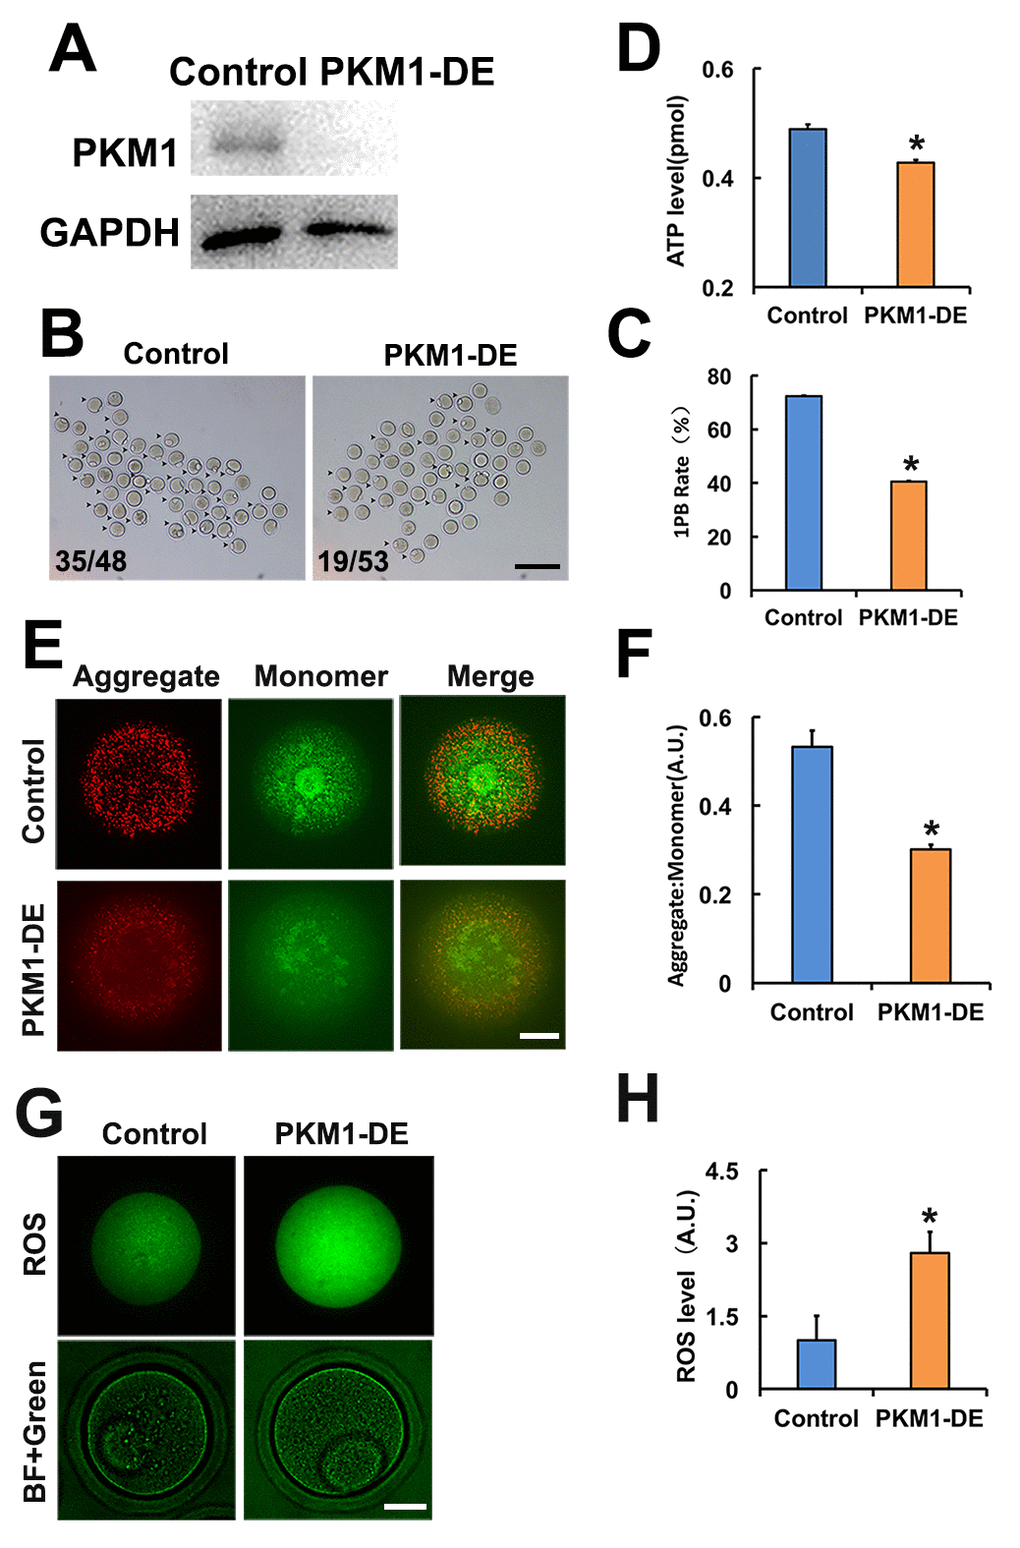 PKM 1 is essential for oocyte maturation and quality. A. Western blot results confirming nearly complete PKM1 depletion induced by specific antibody transfection. GAPDH was used as a loading control. B. Bright field images of control and PKM1-depleted (PKM1-DE) oocytes. Arrowheads indicate oocytes containing first polar bodies (1PB). Numbers indicate the ratio of 1PB oocytes/total oocytes. C. Quantification of 1PB presence in control and PKM1-depleted oocytes. D. ATP quantification in control and PKM1-depleted oocytes. E. JC1 fluorescence indicative of decreased mitochondrial membrane potential after PKM1 depletion. JC1 aggregates are red, monomers are green. F. Quantification of JC1 aggregate/monomer ratio in control and PKM1-depleted oocytes. G. ROS generation, revealed by DCFH-DA staining (green fluorescence), in control and PKM1-depleted oocytes. BF: Bright field. H. Quantification of ROS levels in control and PKM1-depleted oocytes. Scale bar for B, 200 µm; for E and G, 20 µm. * p ˂ 0.05.